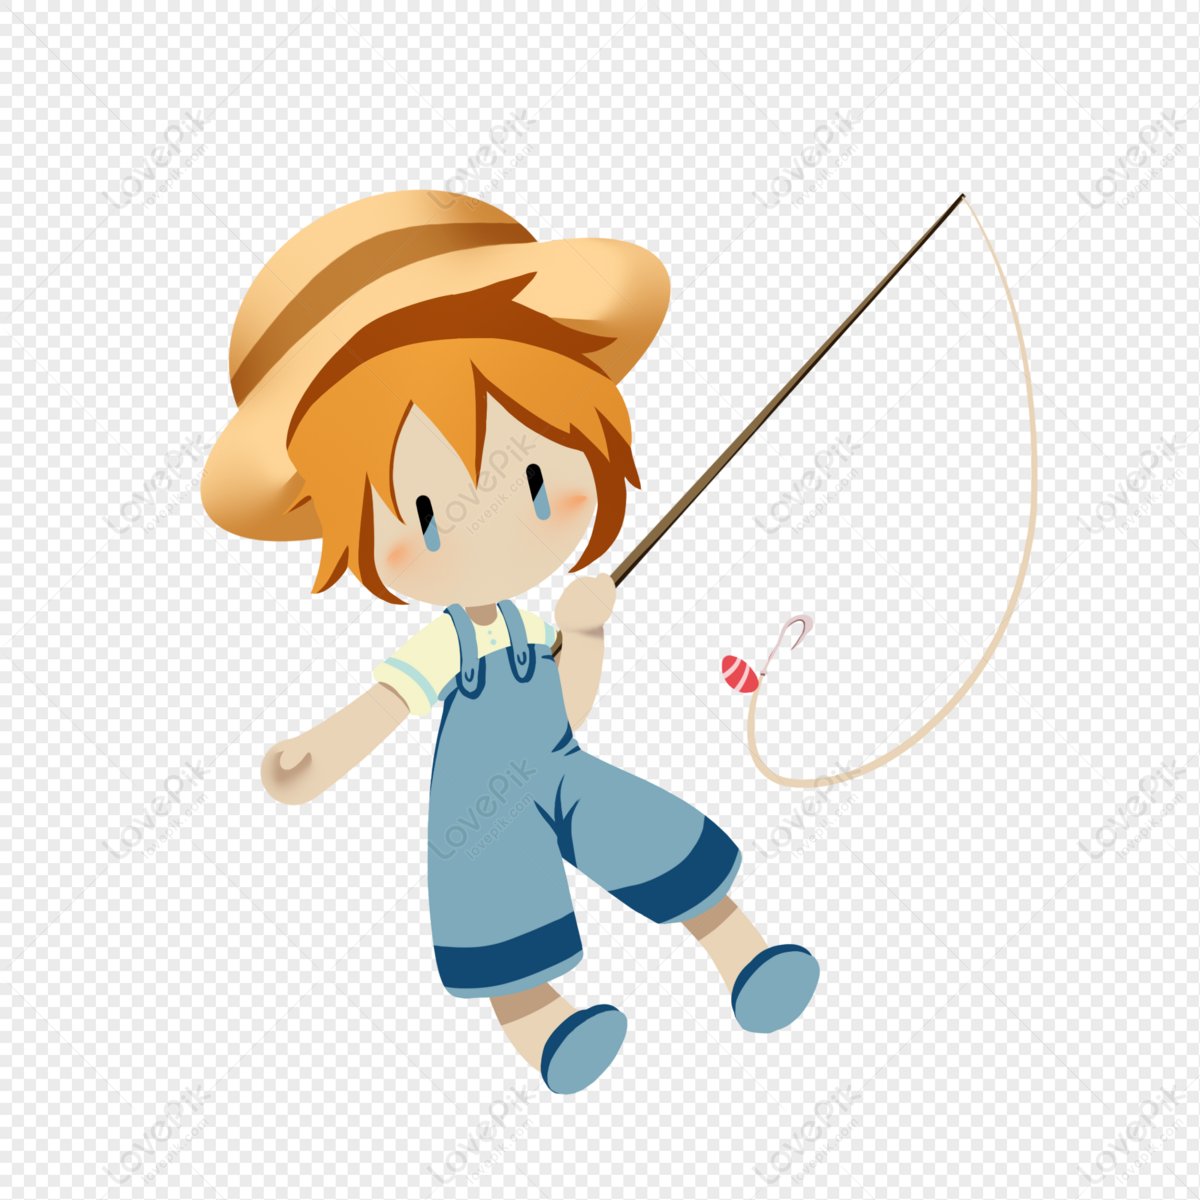 Fishing Hat Little Boy, Boy Vector, Cartoon Fishing, Fishing Rod PNG Image  And Clipart Image For Free Download - Lovepik